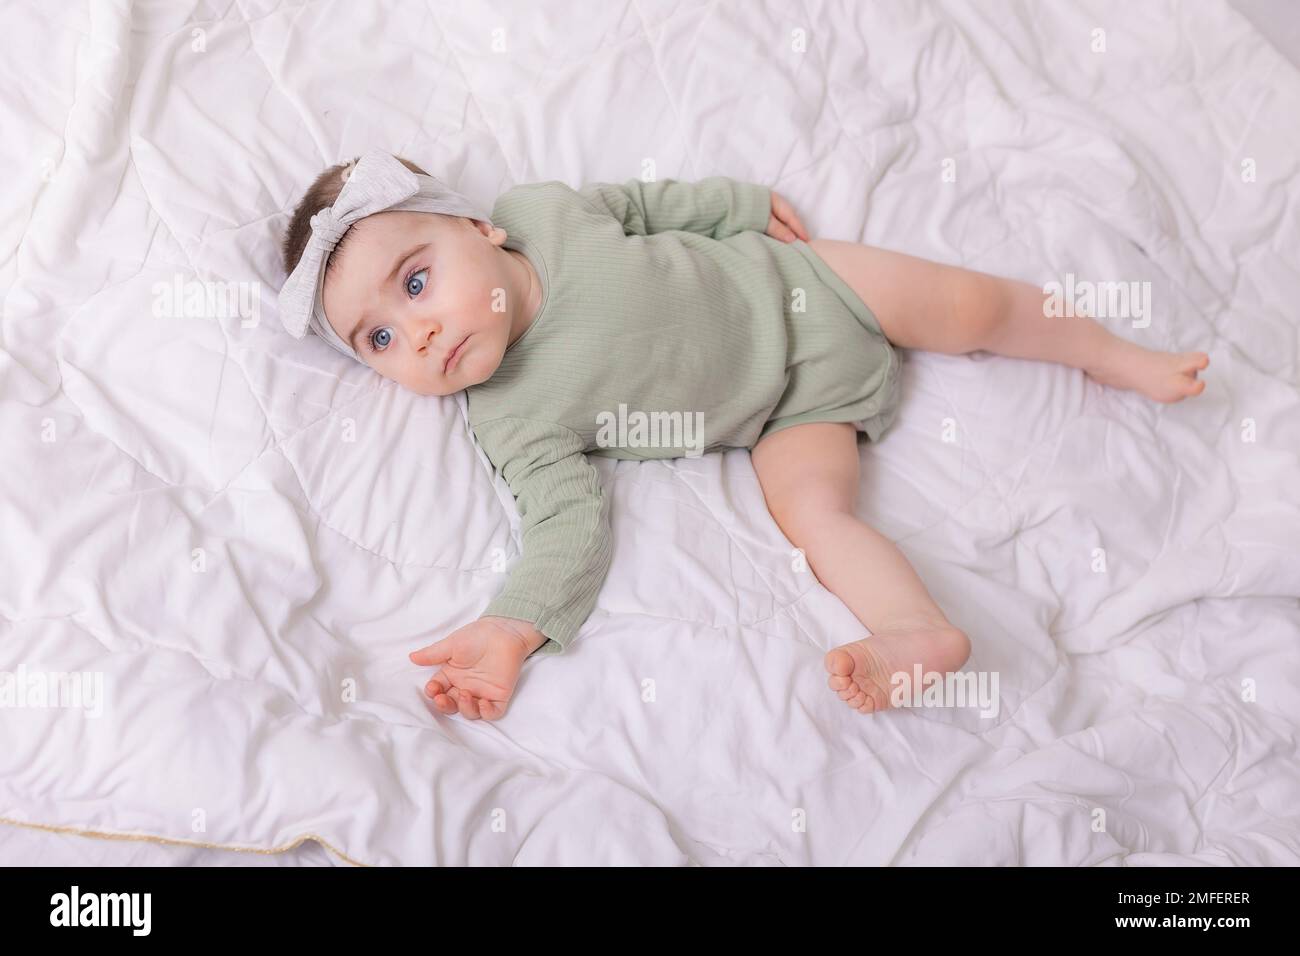 a girl with beautiful big eyes is rubbing the baby at home on the bed in a cotton bodysuit on white bed linen. High quality photo Stock Photo